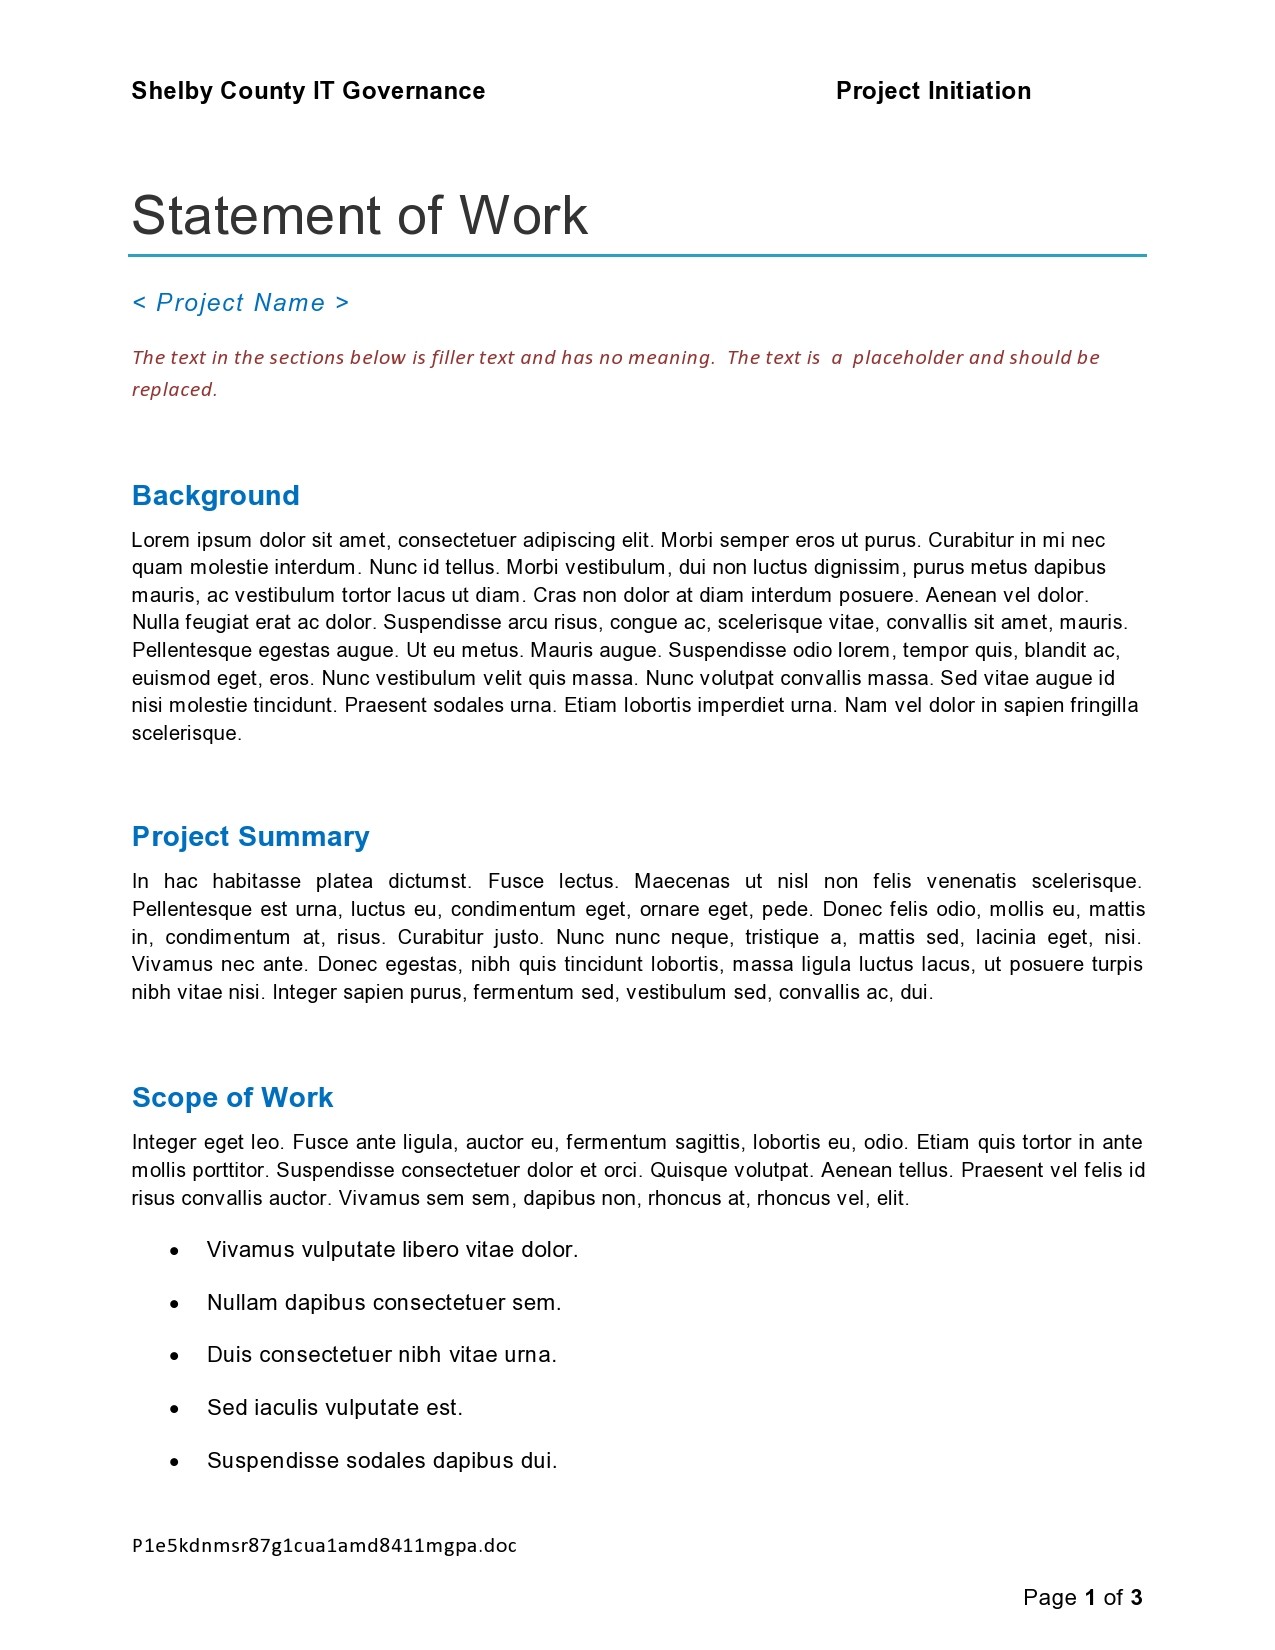 42-great-statement-of-work-templates-sow-templatelab